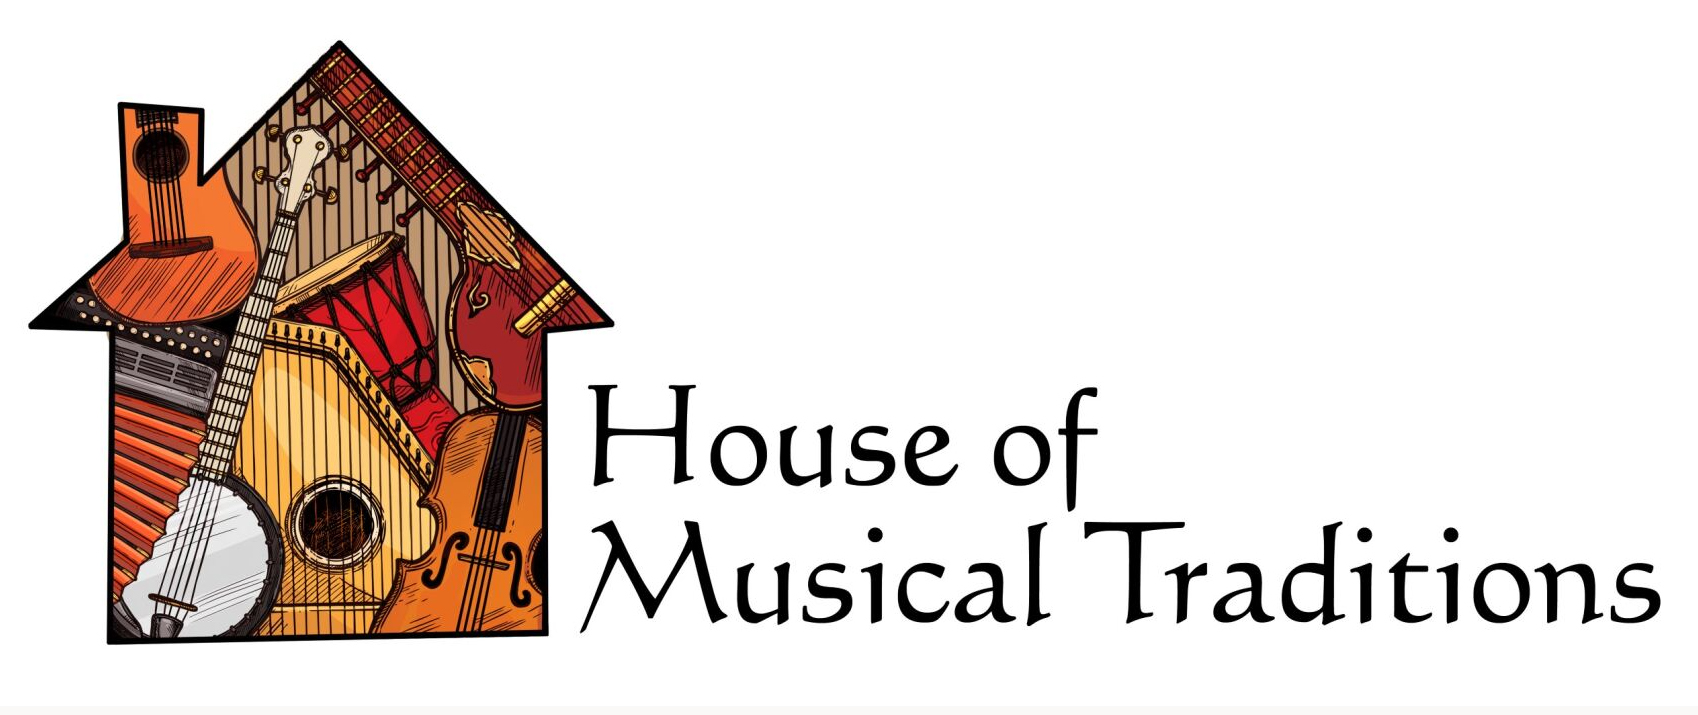 House Of Musical Traditions Logo (1)